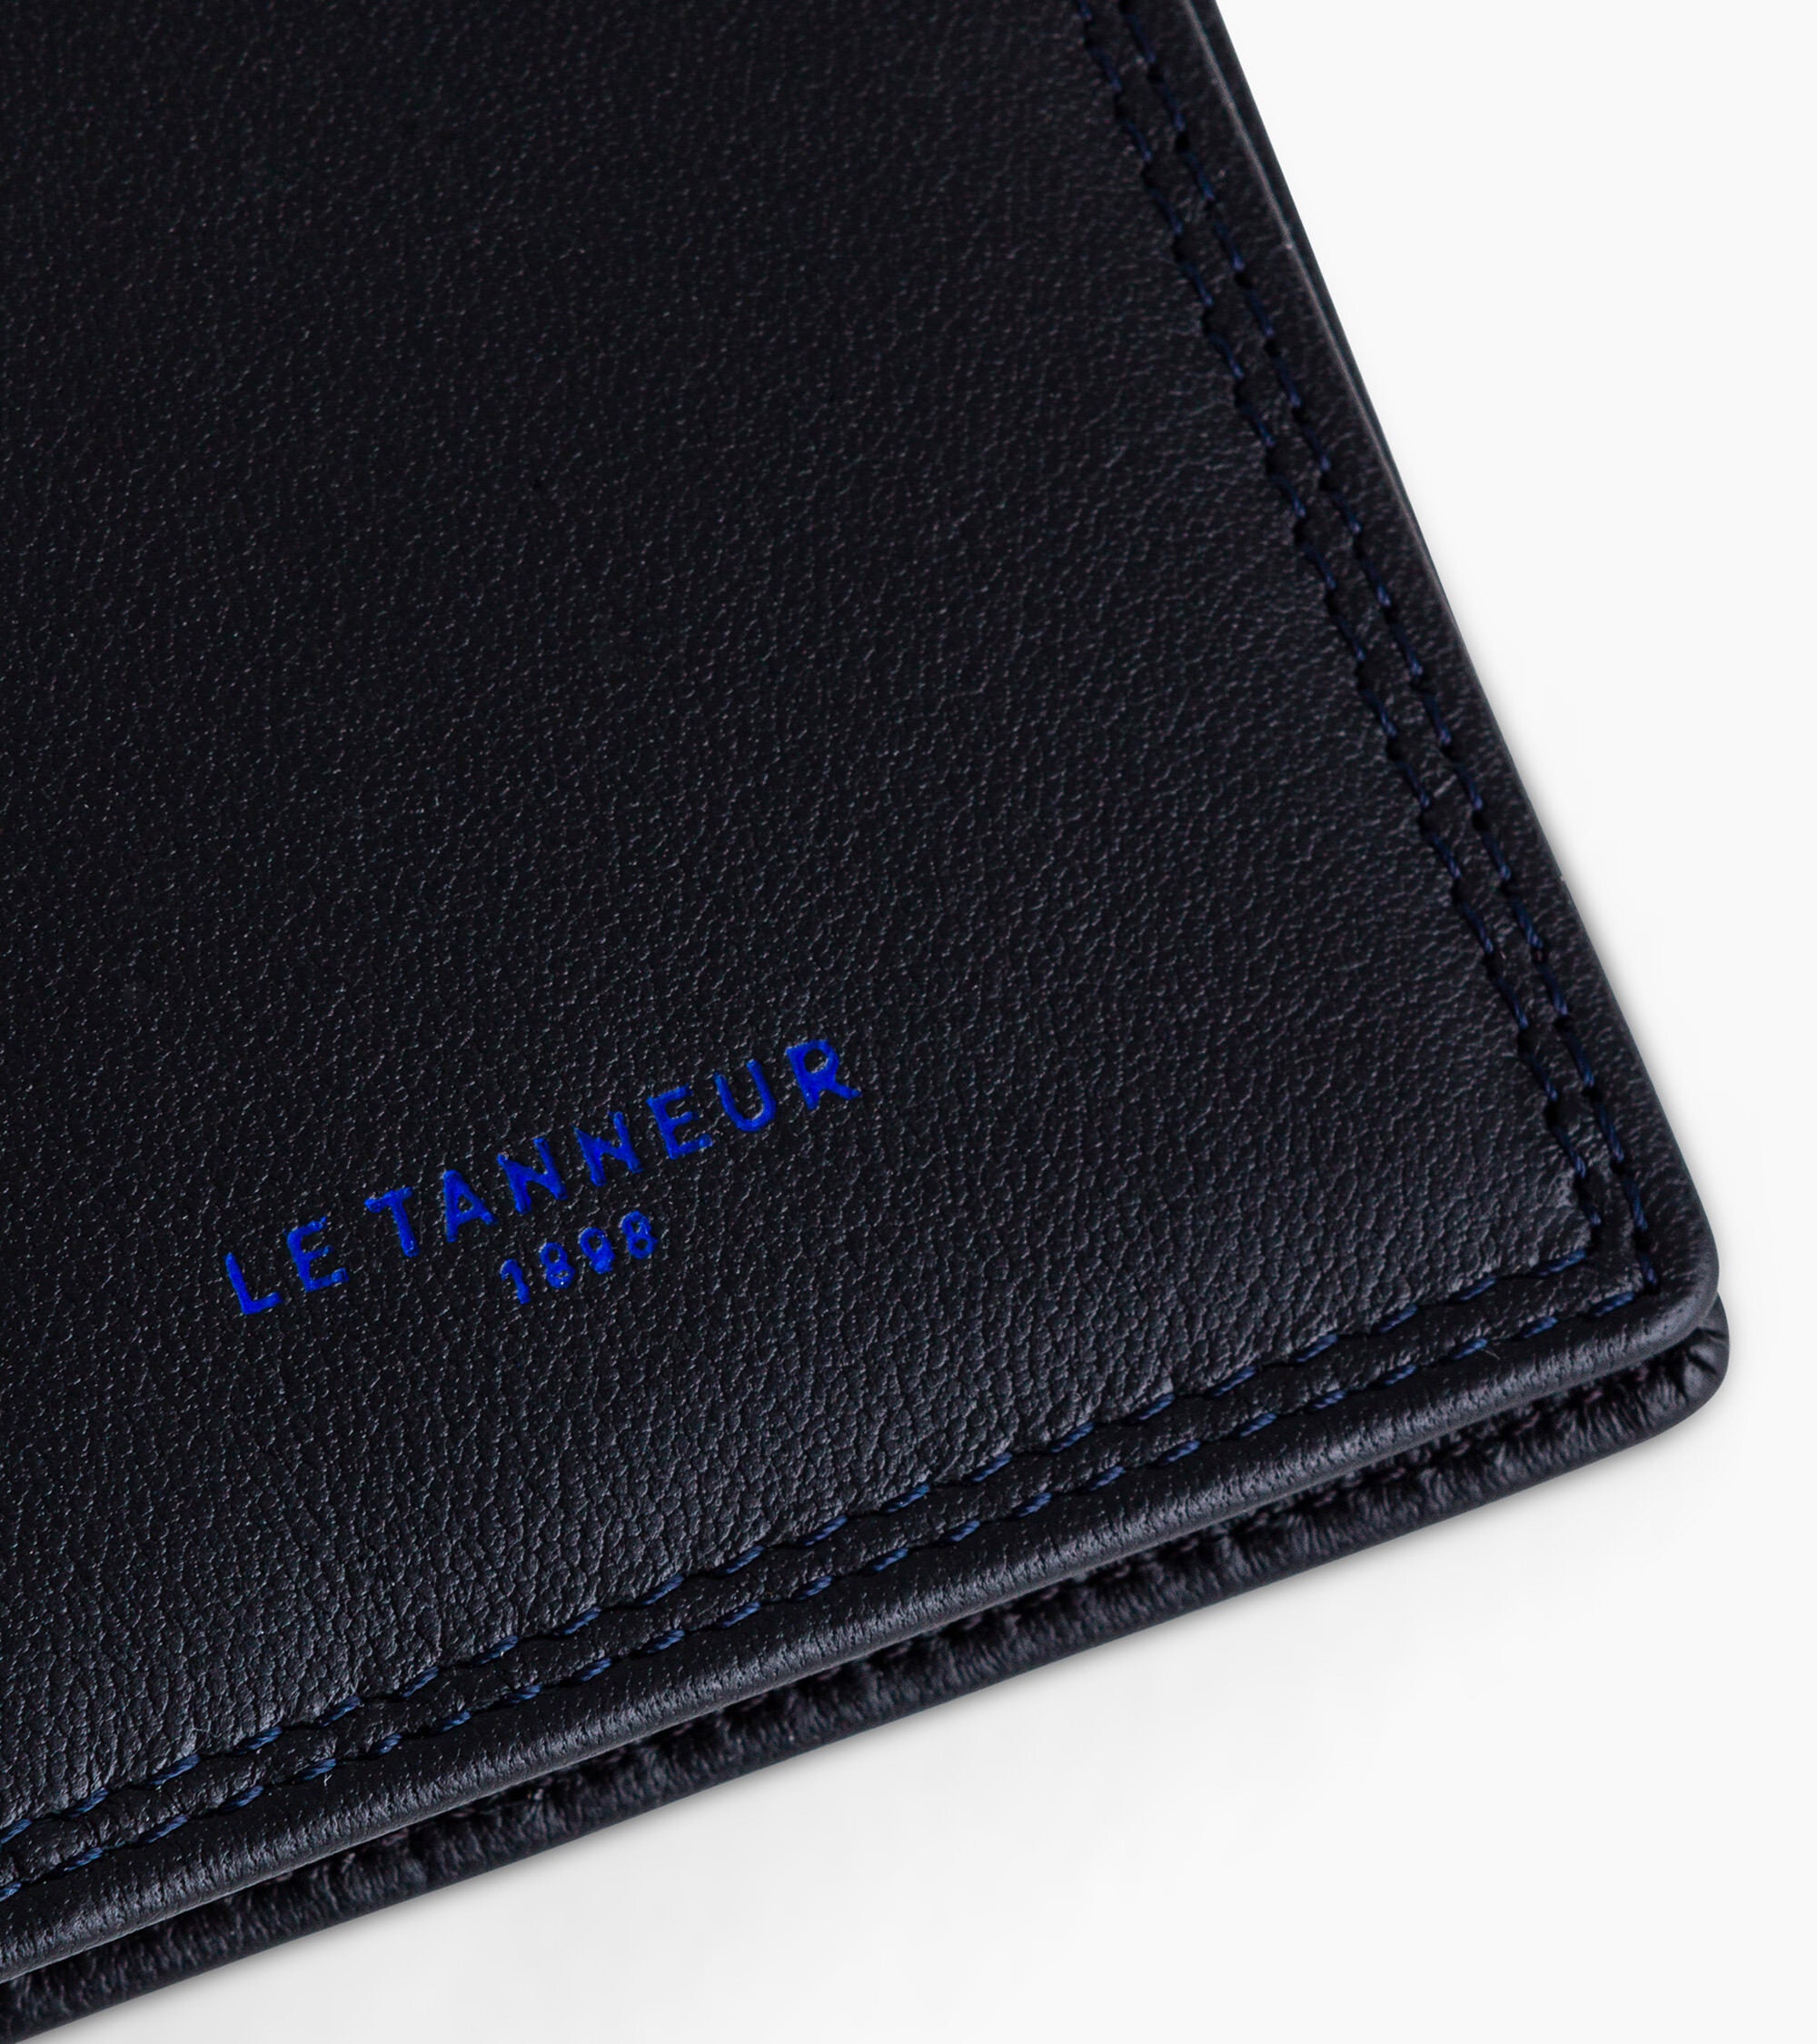 Martin smooth leather cardholder